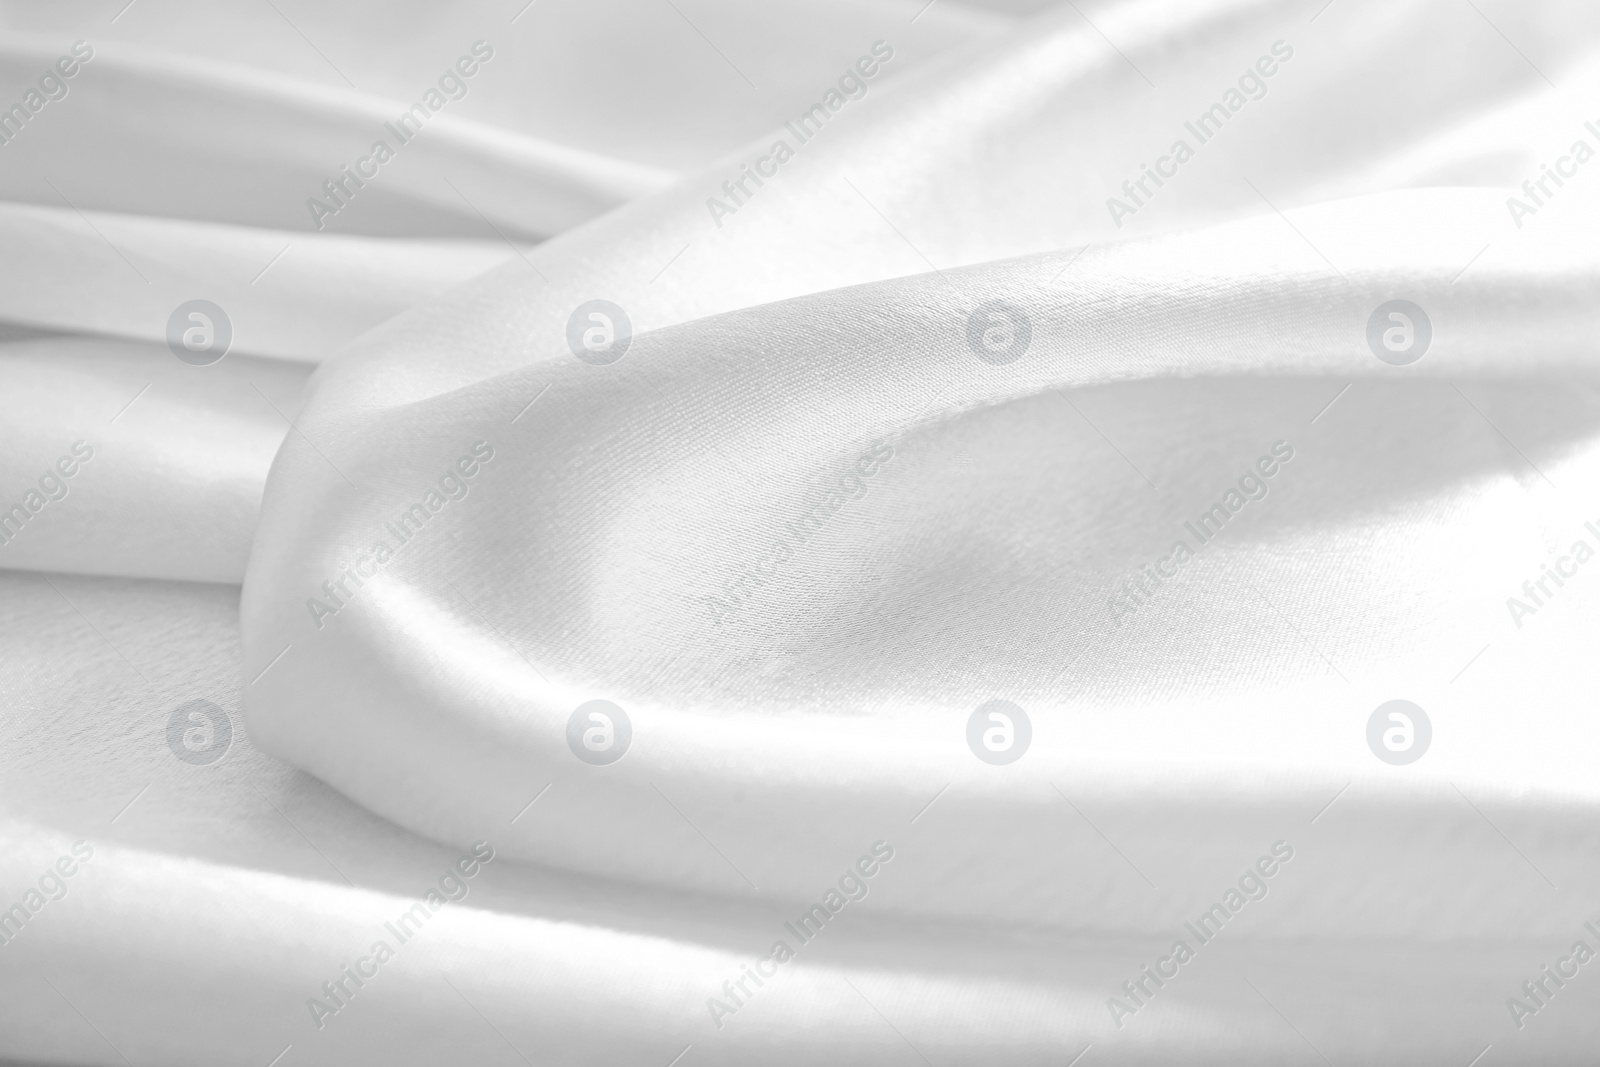 Image of Texture of white silk as background, closeup view